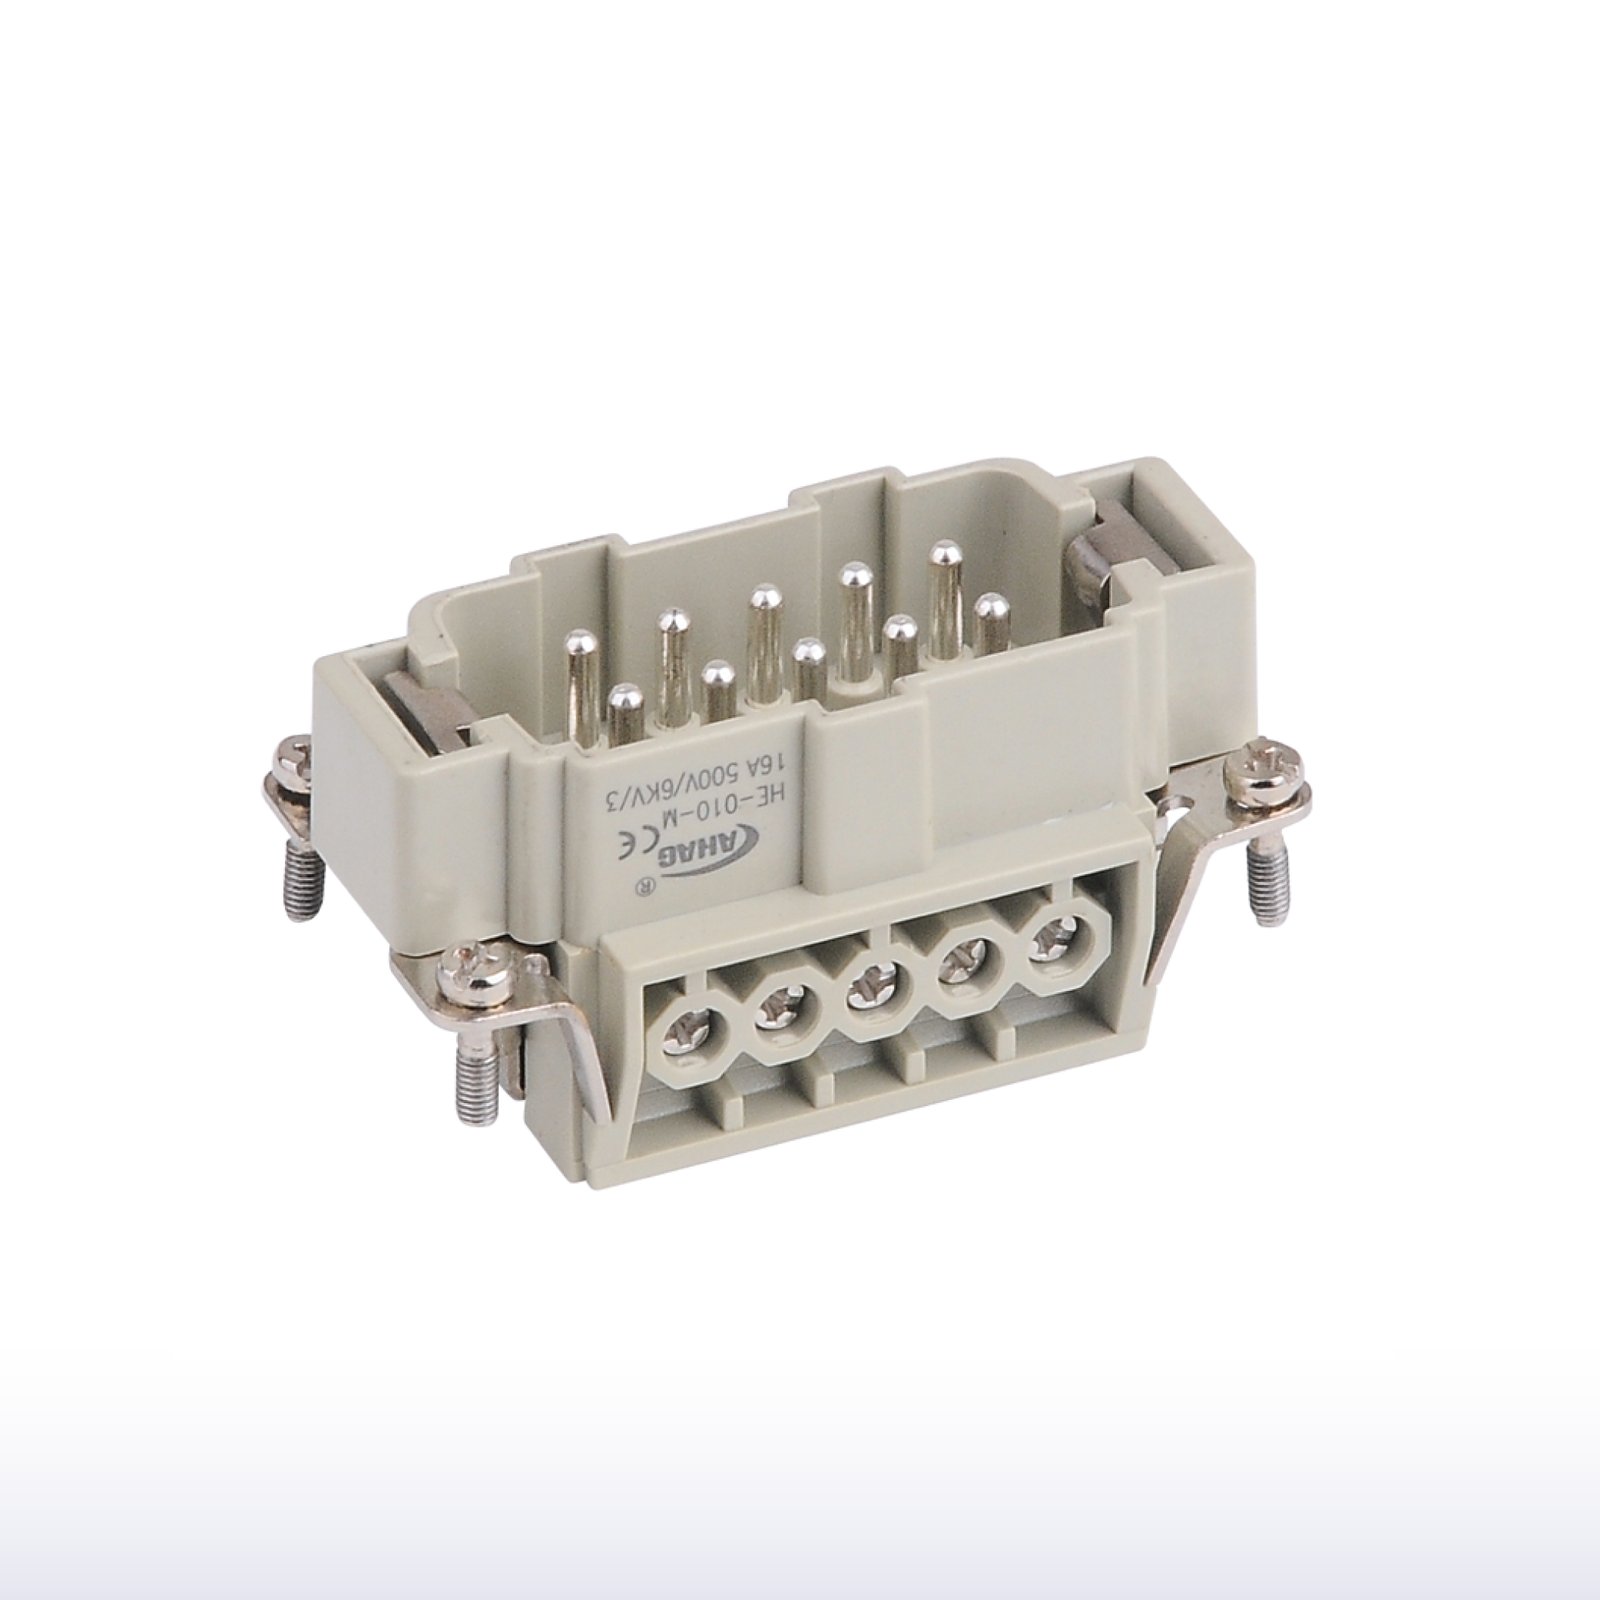 This is HE-010-M,10pins heavy duty connector